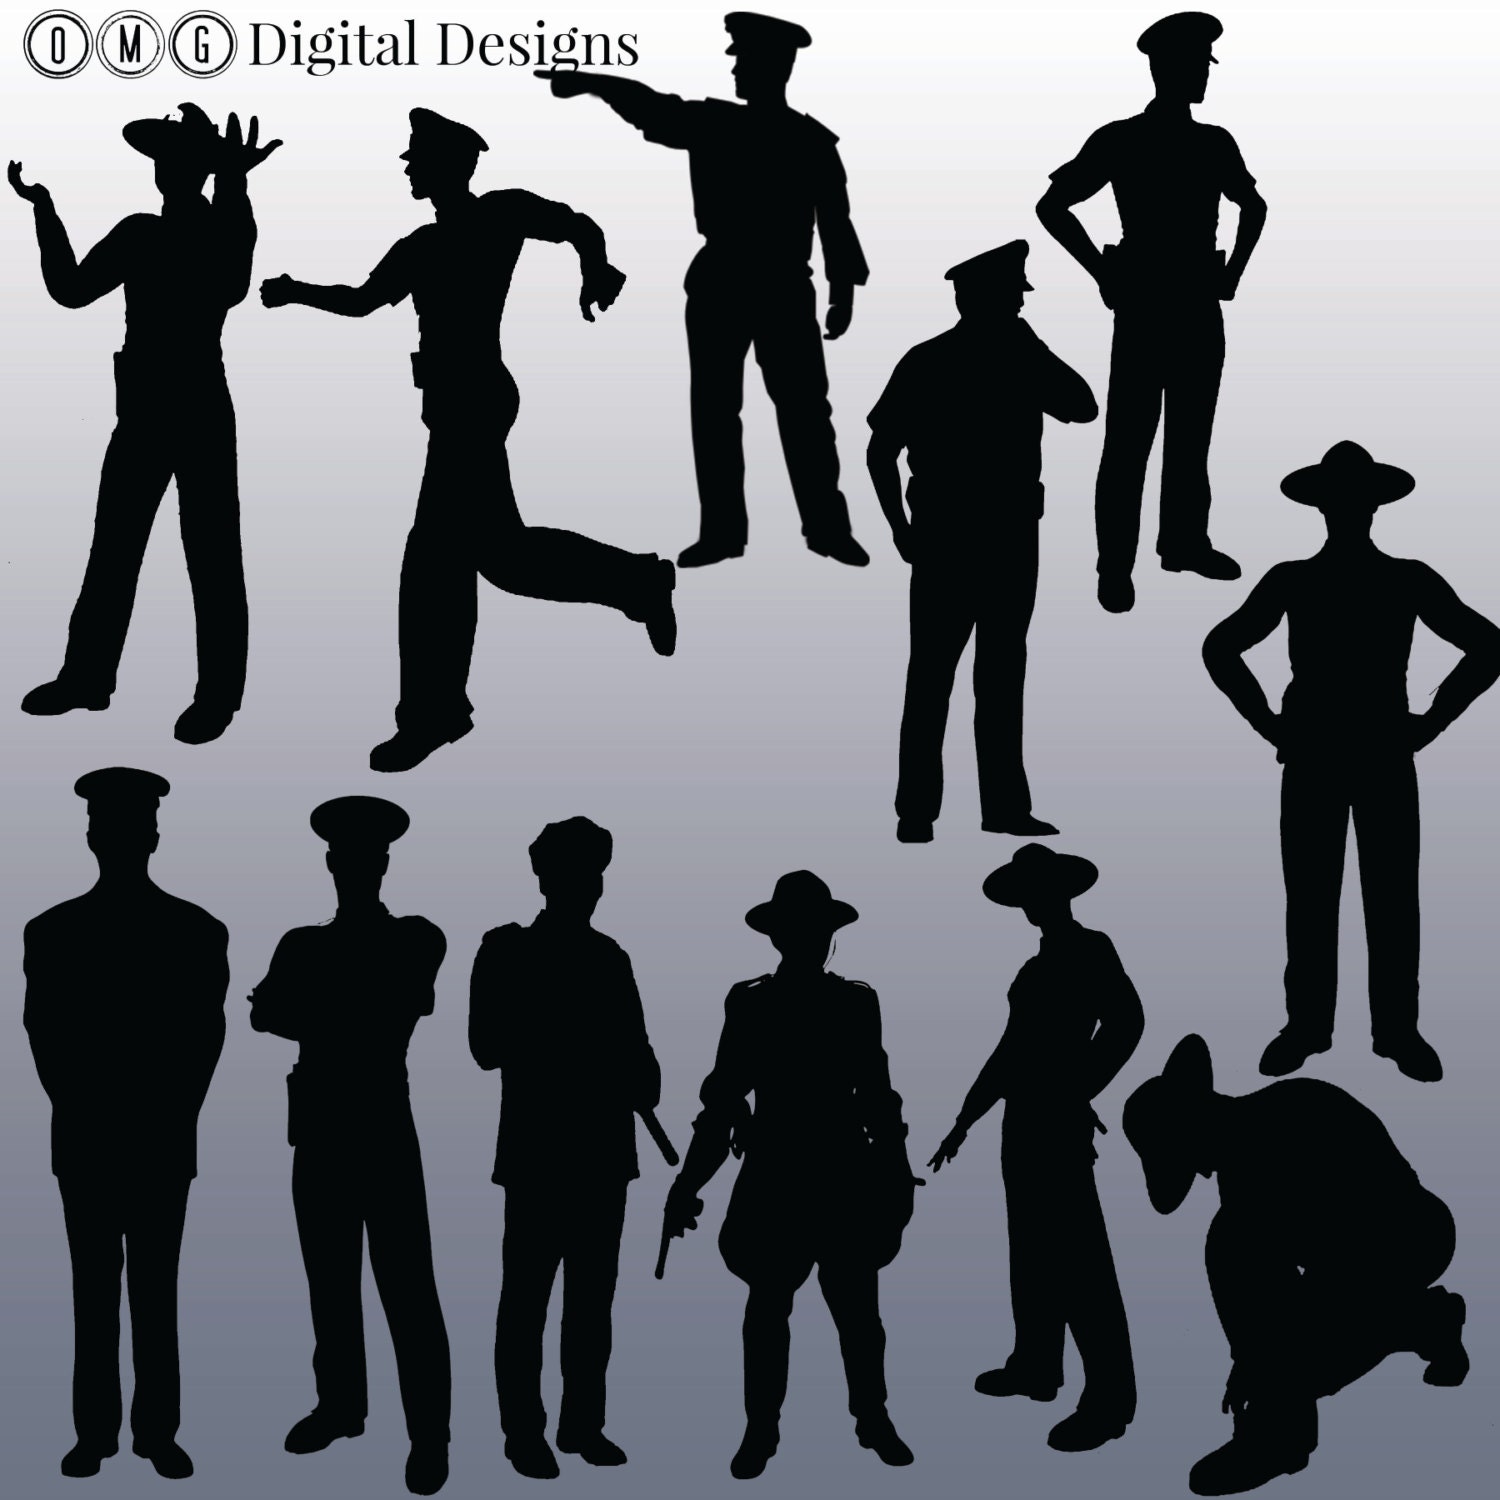 Download 12 Police Silhouette Clipart Images, Clipart Design ...